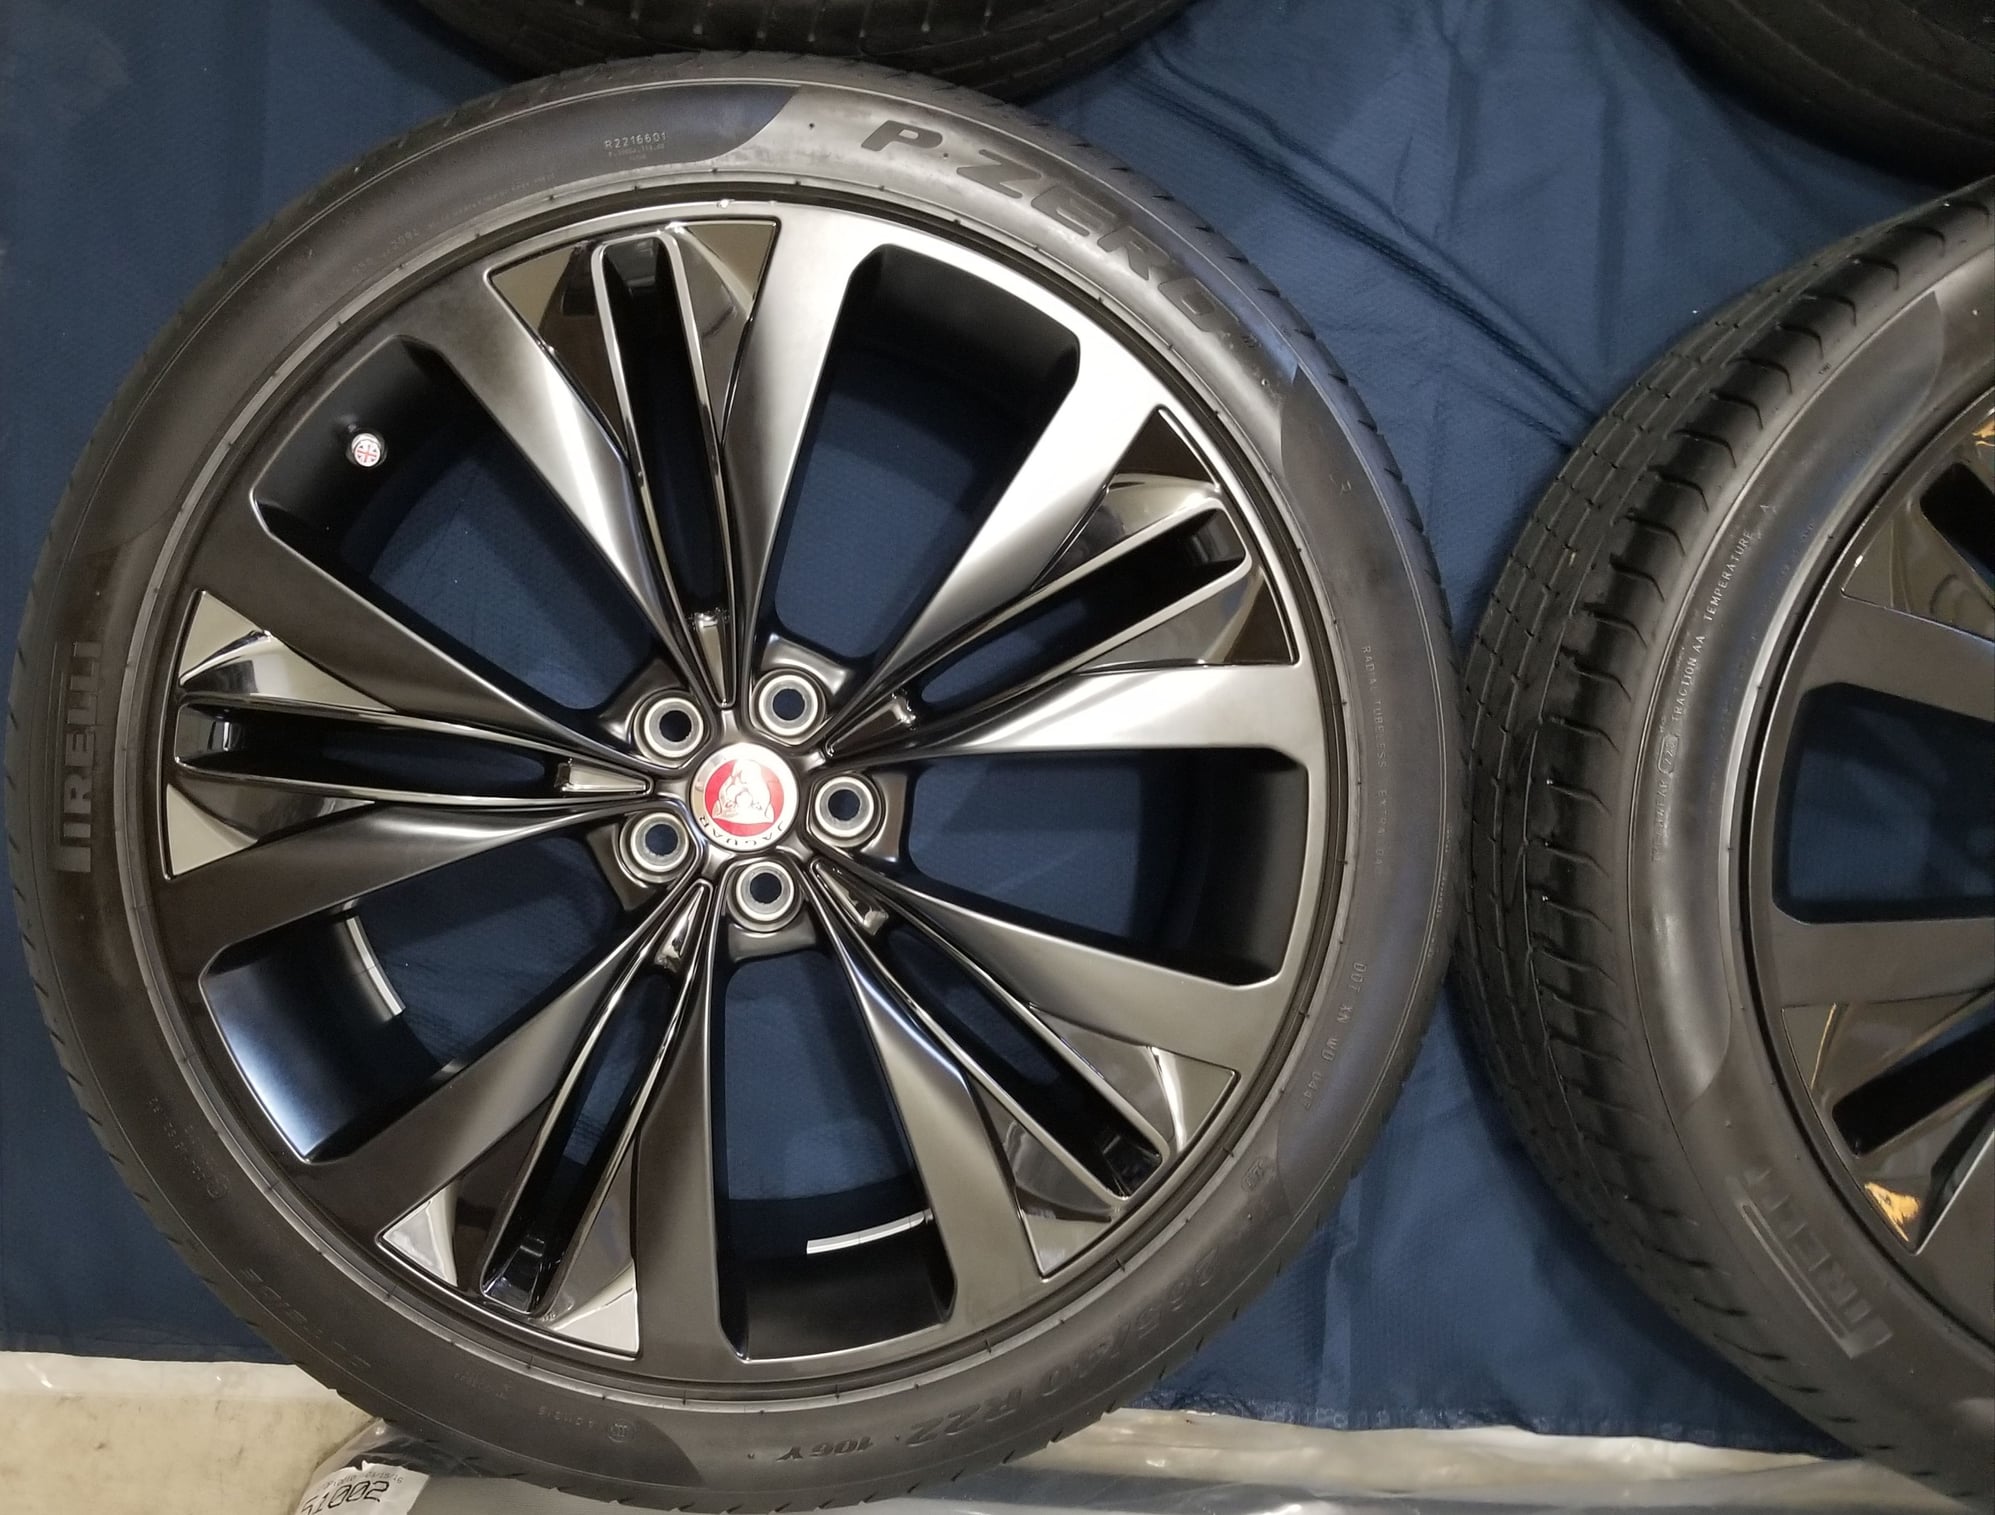 Wheels and Tires/Axles - Jaguar Double Helix 22 Inch Forged Rims - T4A3797 -W/ TPMS & Pirelli... - New - All Years Jaguar All Models - Toronto, ON L7A0T7, Canada